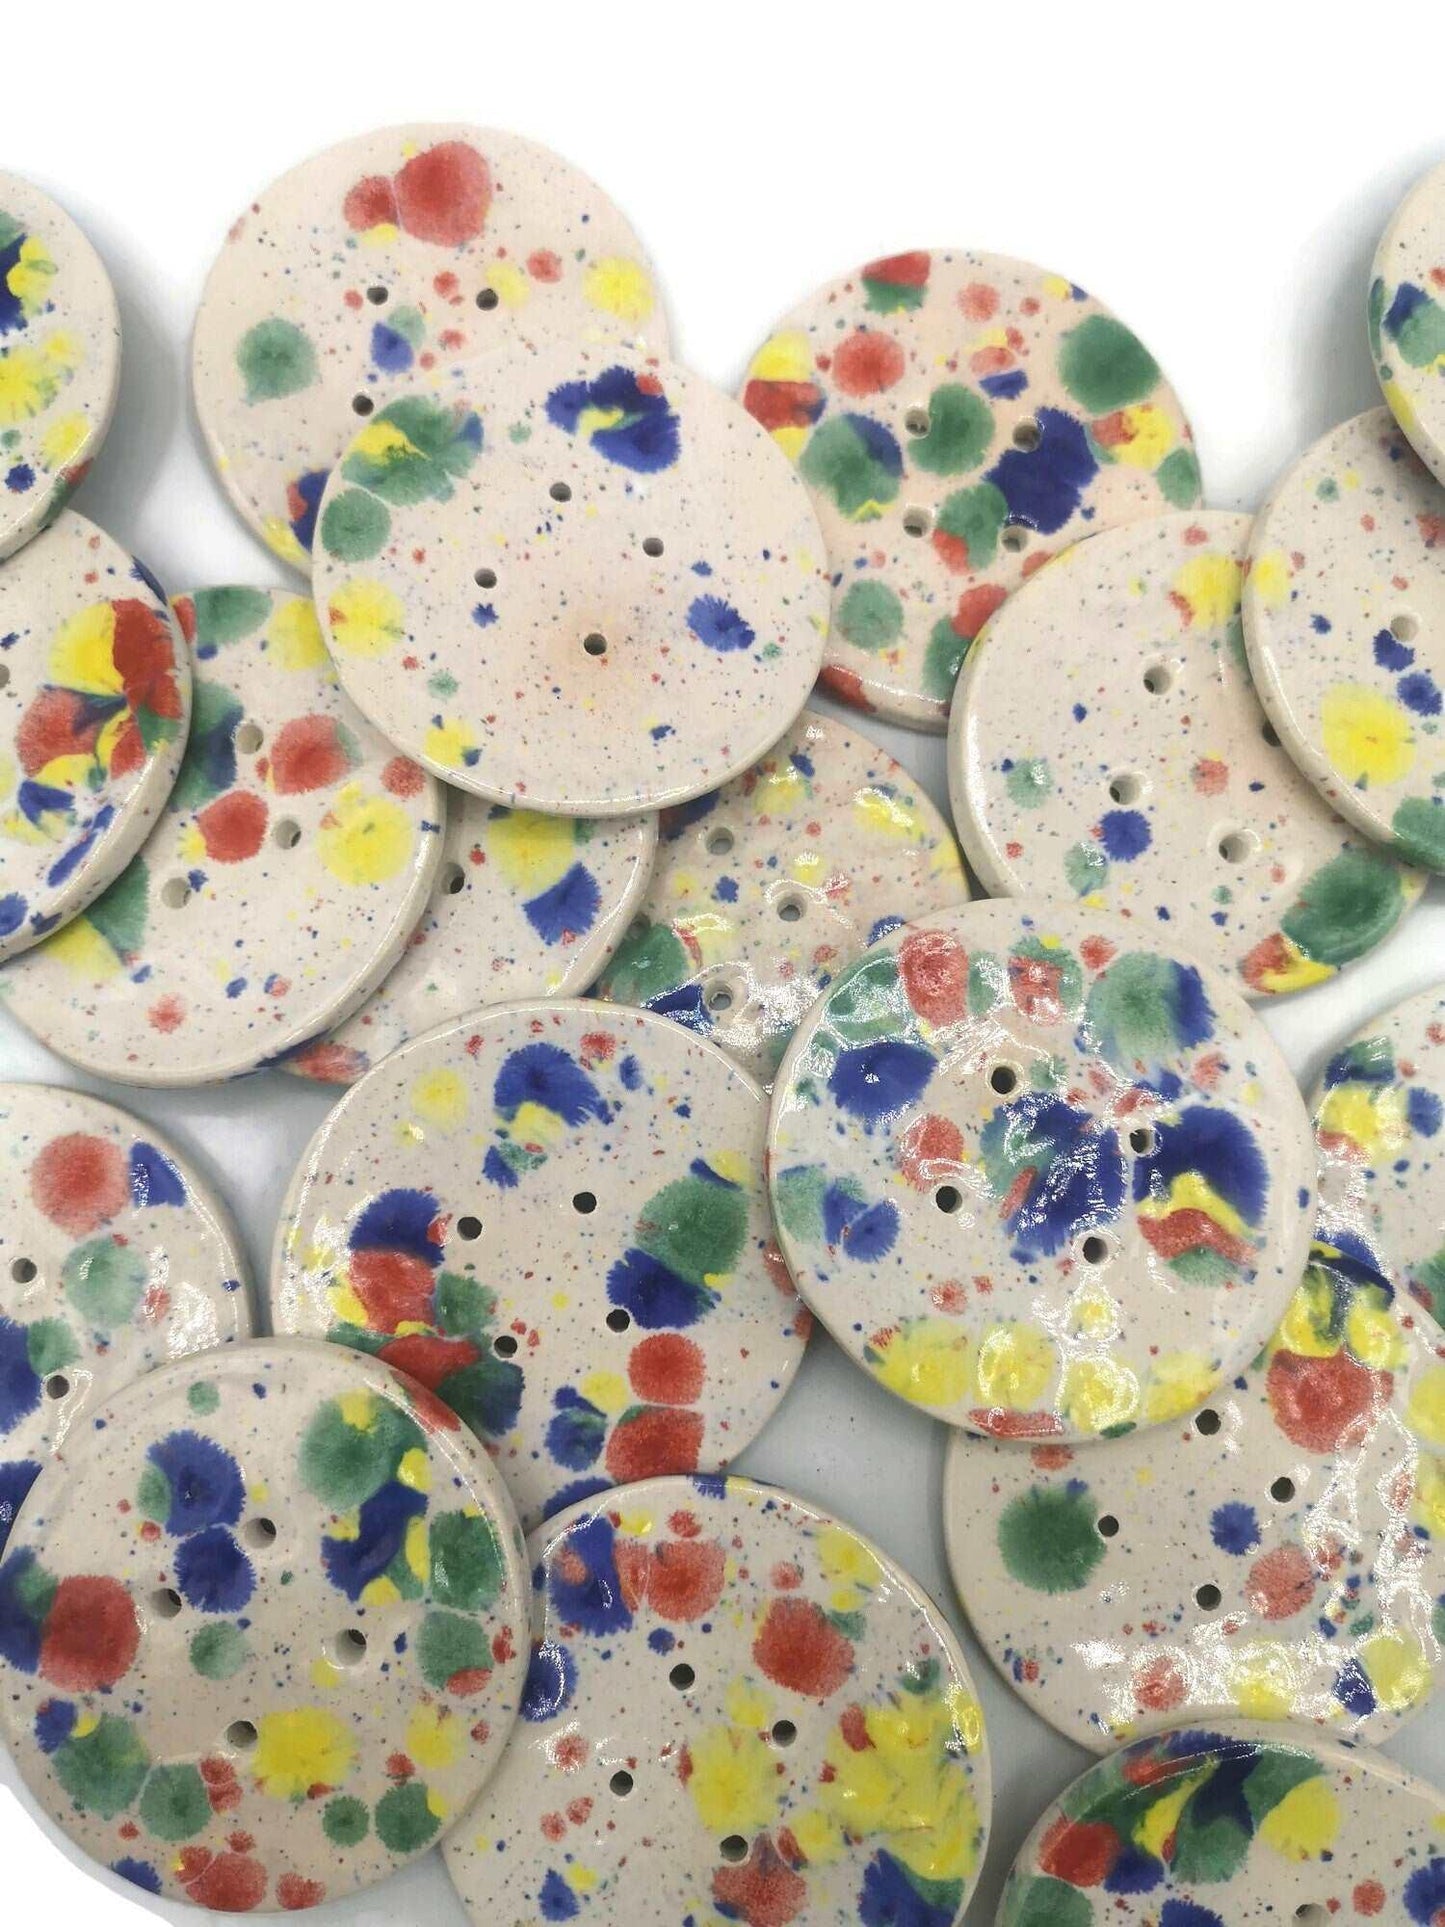 1Pc 65mm Colorful Giant Sewing Buttons, Jumbo Confetti Decorative Novelty Extra Large Buttons for Crafts, Handmade Ceramic Coat Button